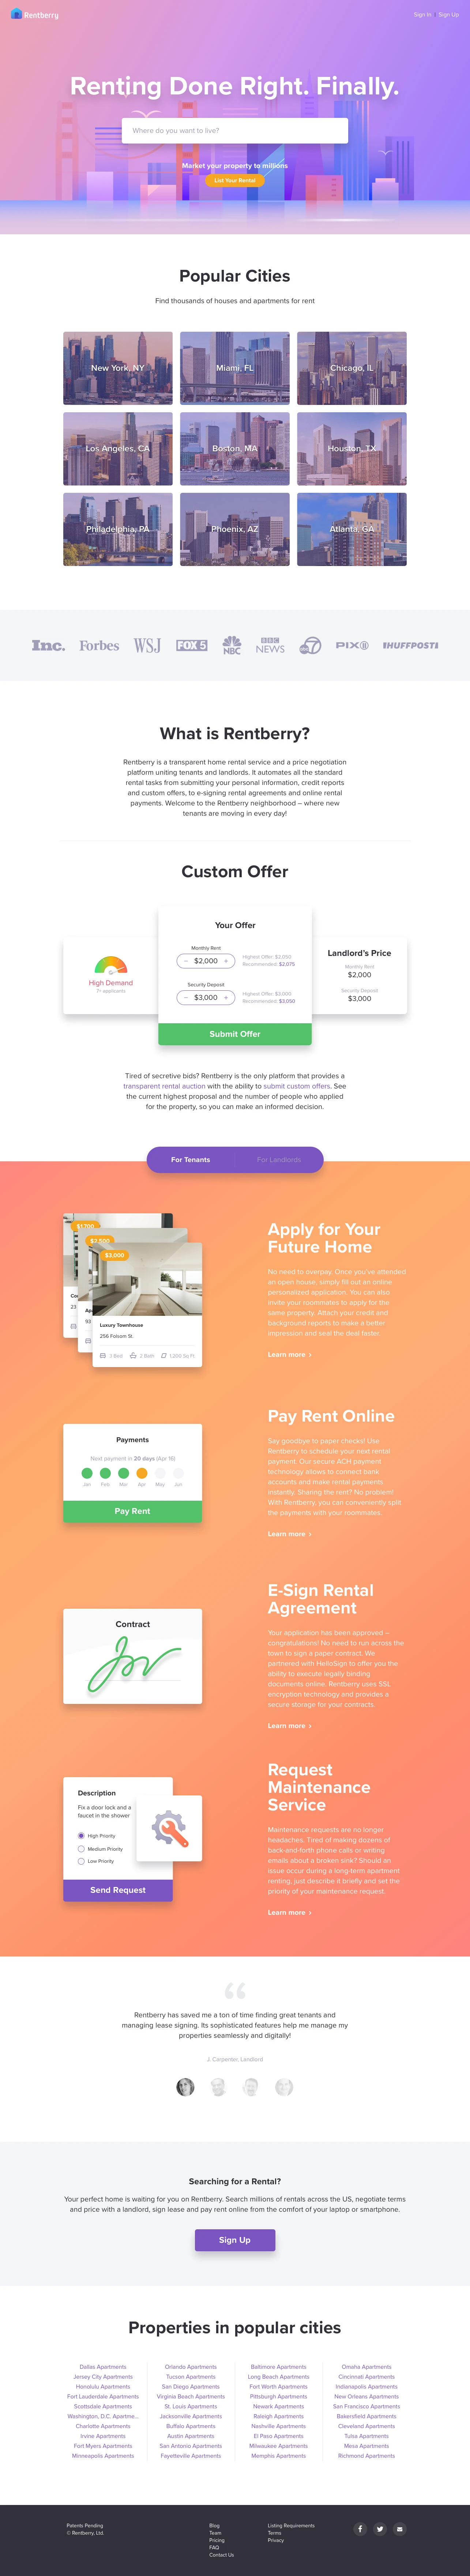 Rentberry Landing Page Example: Rentberry facilitates the long-term rental process for both tenants and homeowners. We help tenants save time on rentals by owners and landlords get true market values for their properties.